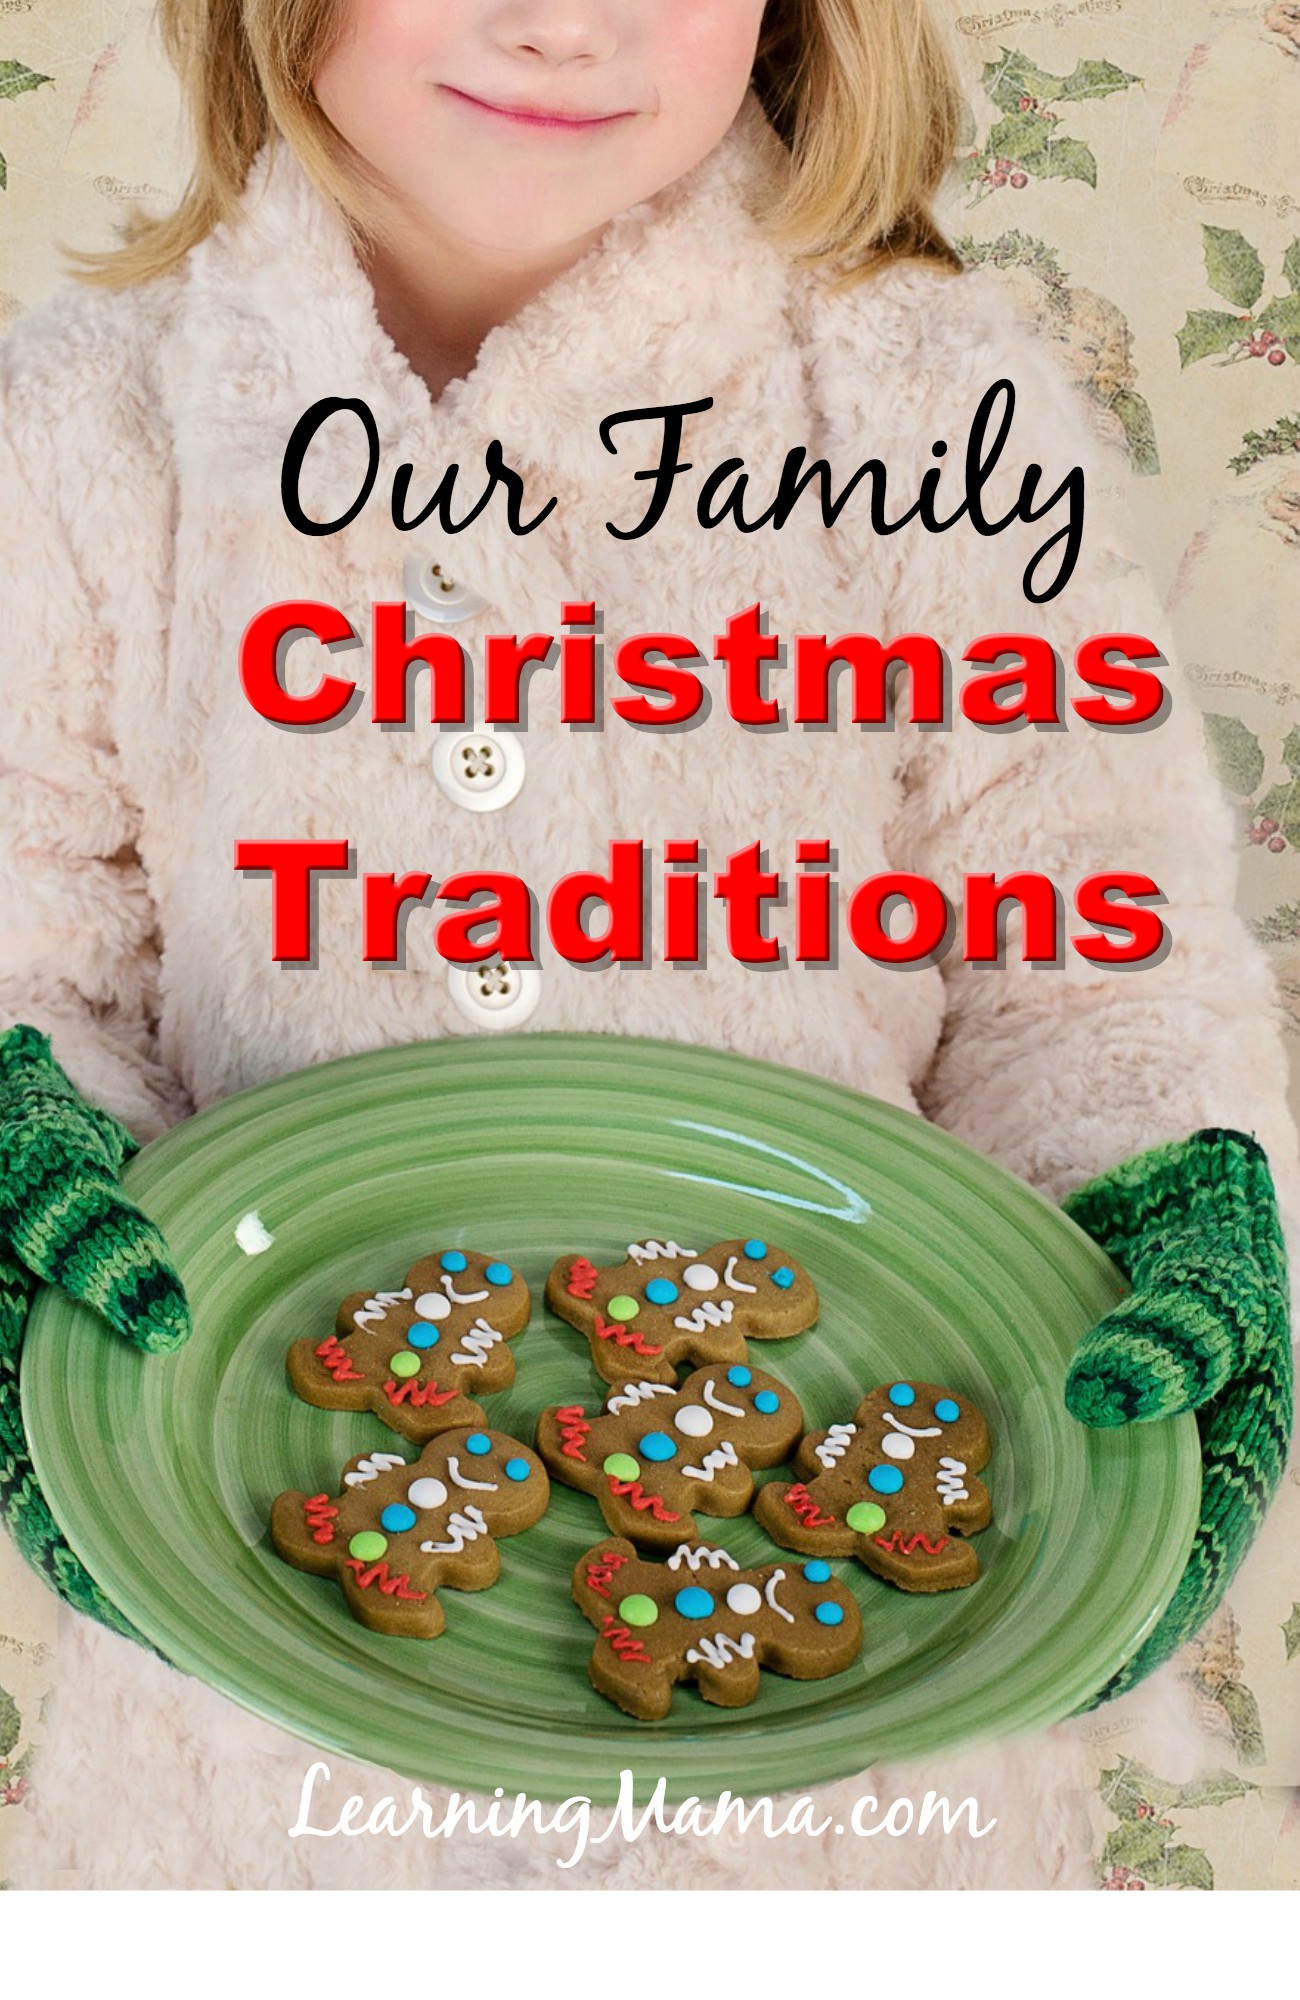 Our Family Christmas Traditions - 3 Christmas traditions that give me the warm & fuzzies!